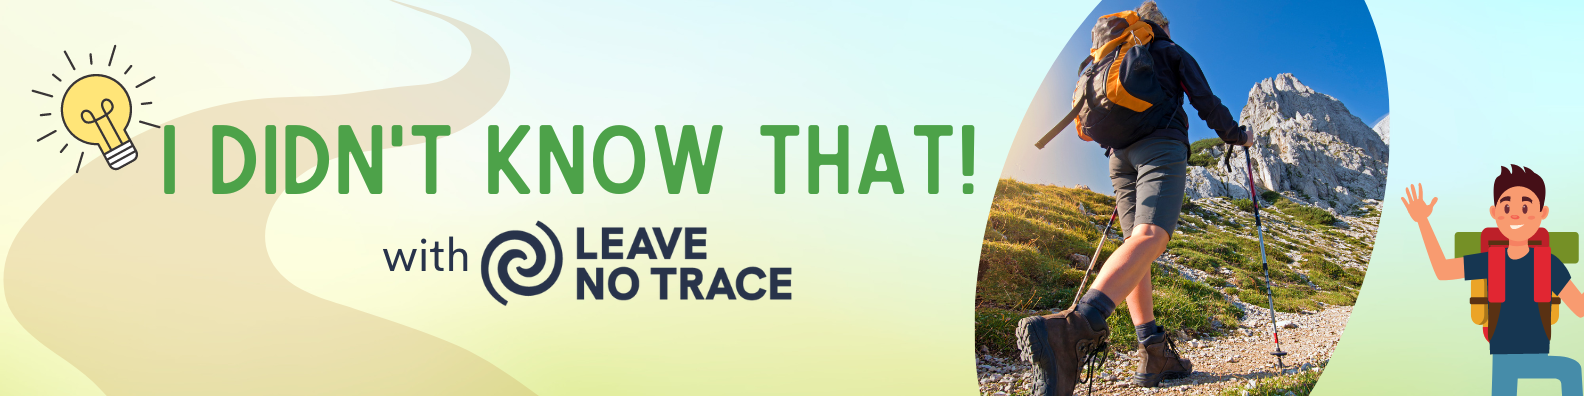 a title banner with title "I Didn't Know That! with Leave No Trace" and an image of a hiker